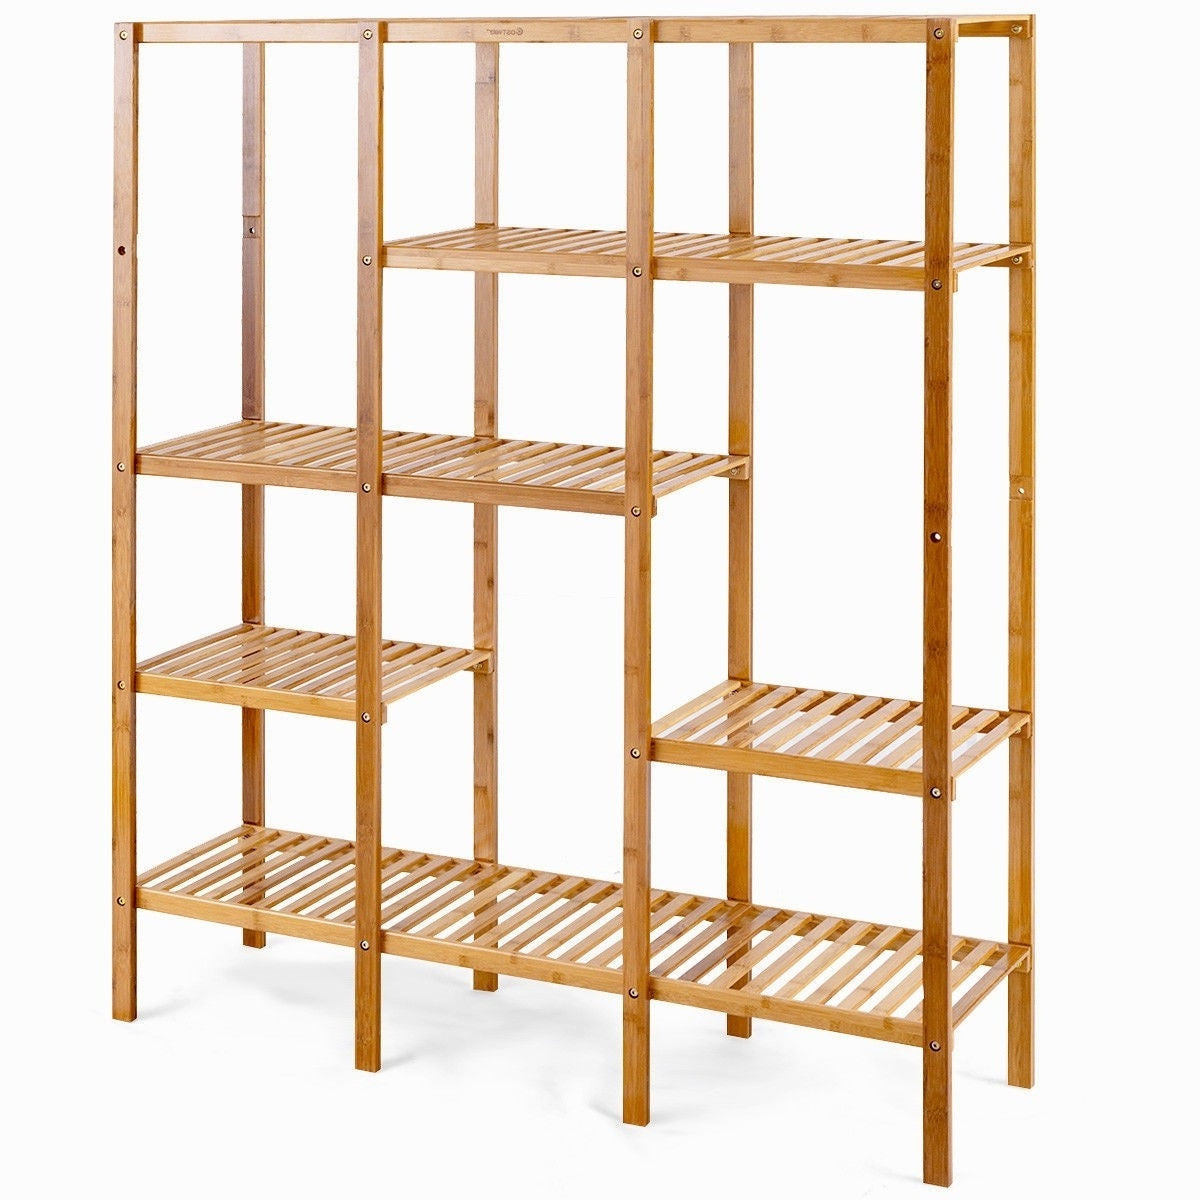 Living Room > Bookcases - Eco-Friendly Bamboo 4-Shelf Bookcase Storage Rack